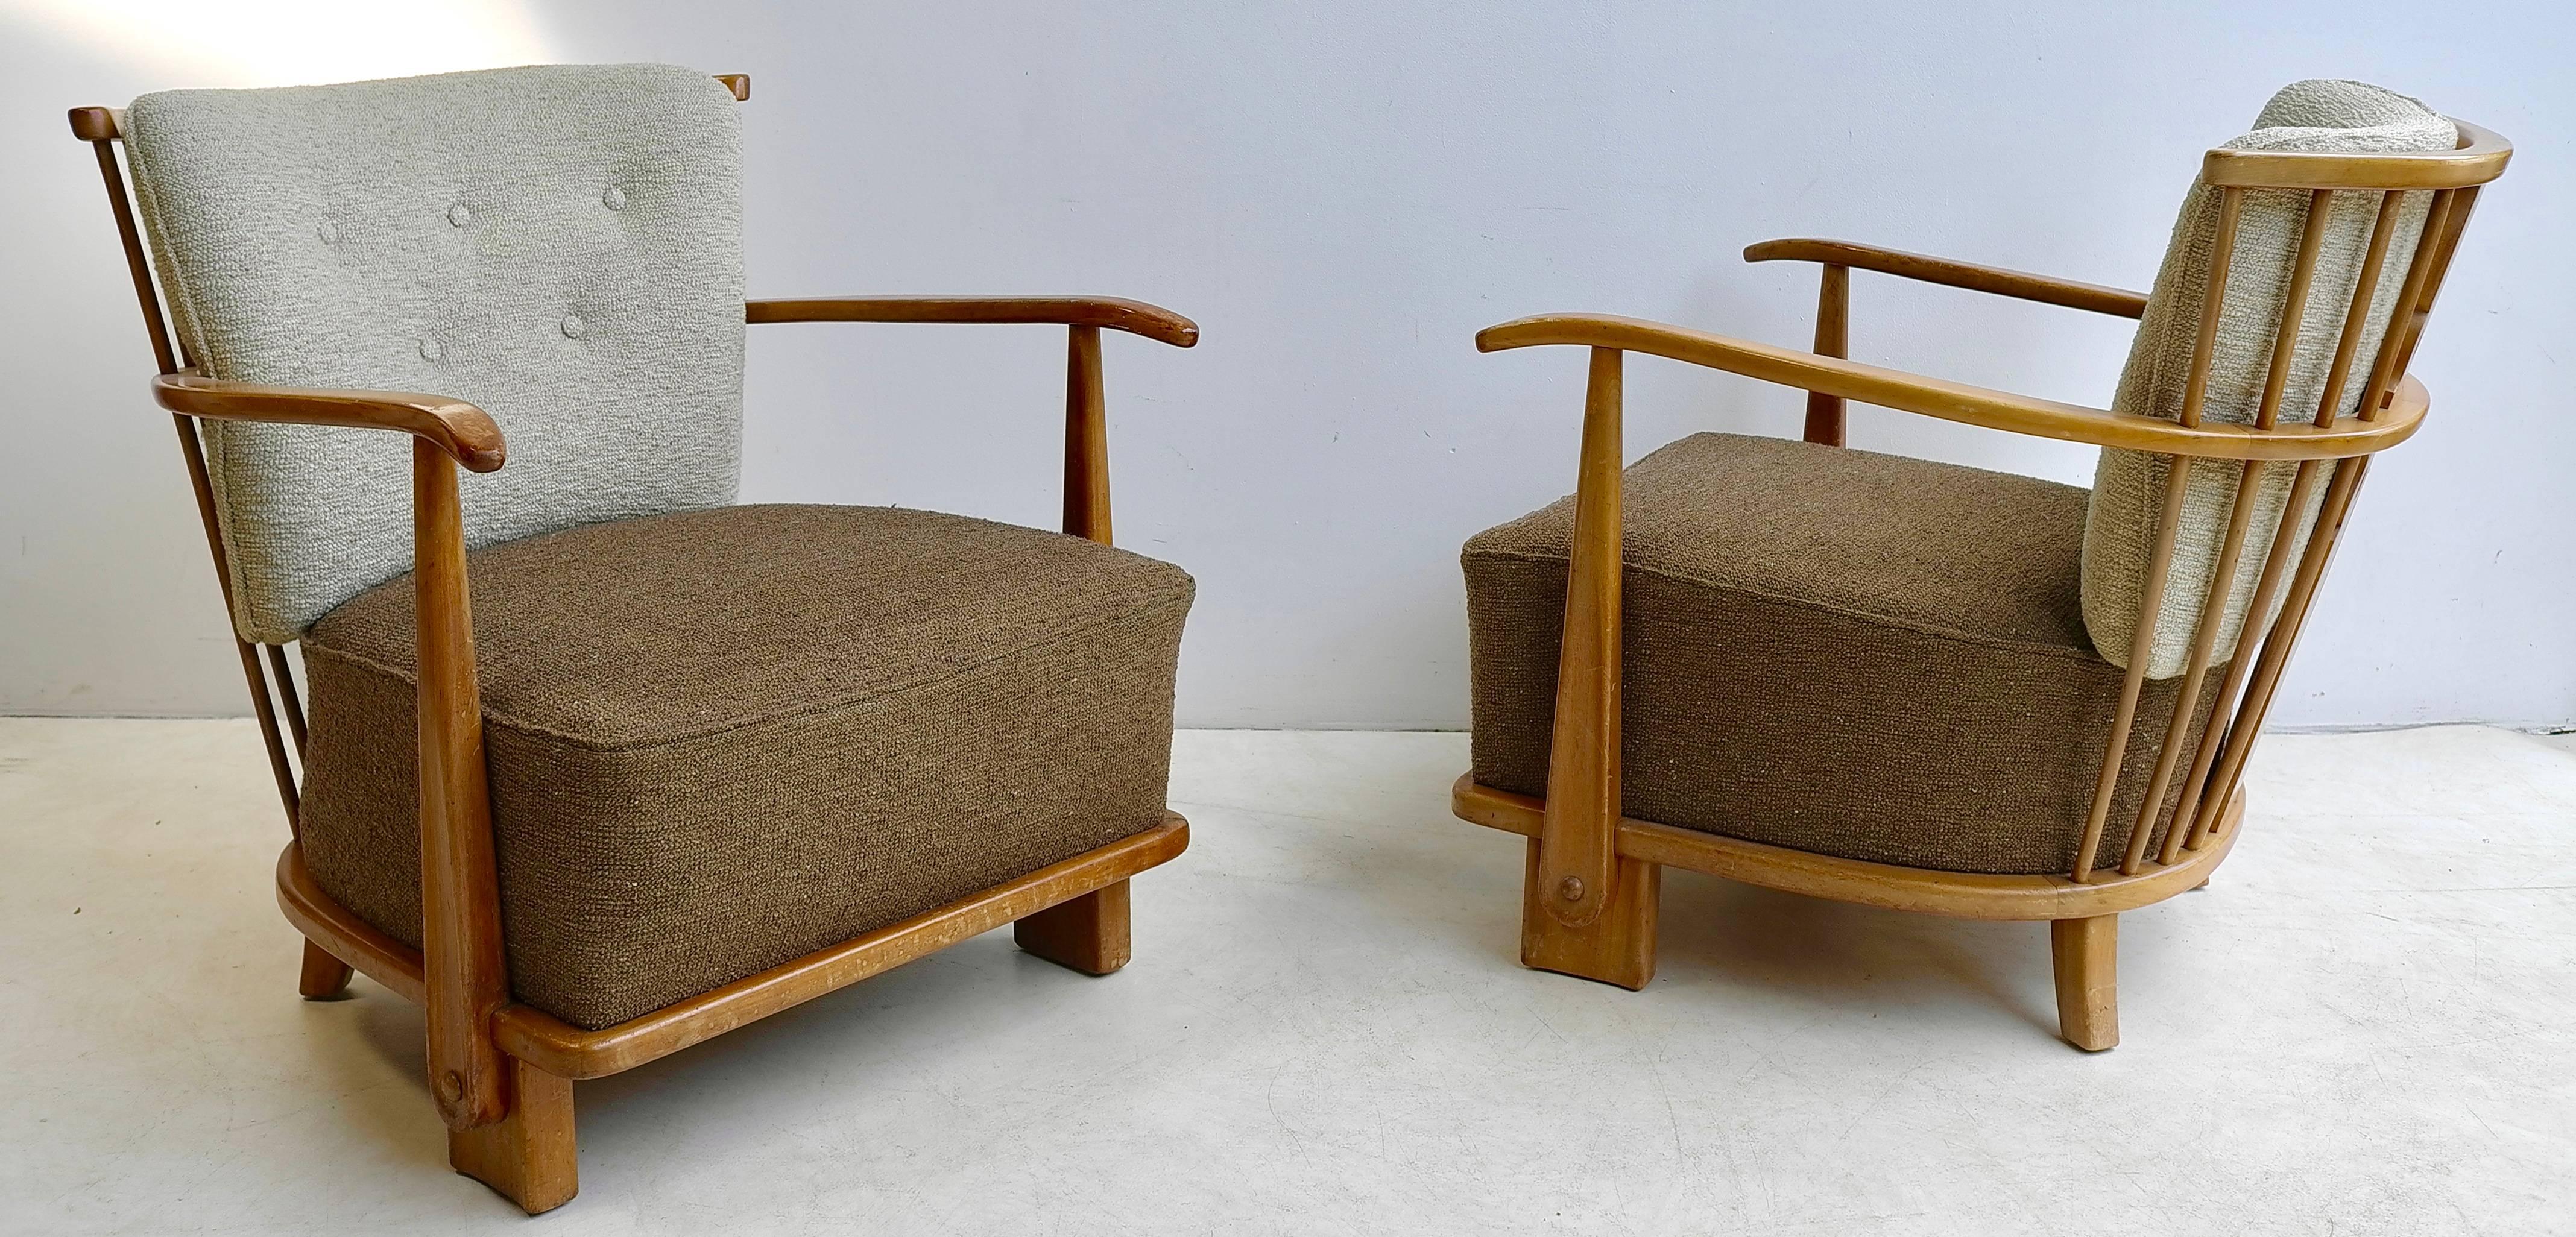 Rare pair of organic lounge chairs by Theo Ruth for Artifort, early 1950s.
 